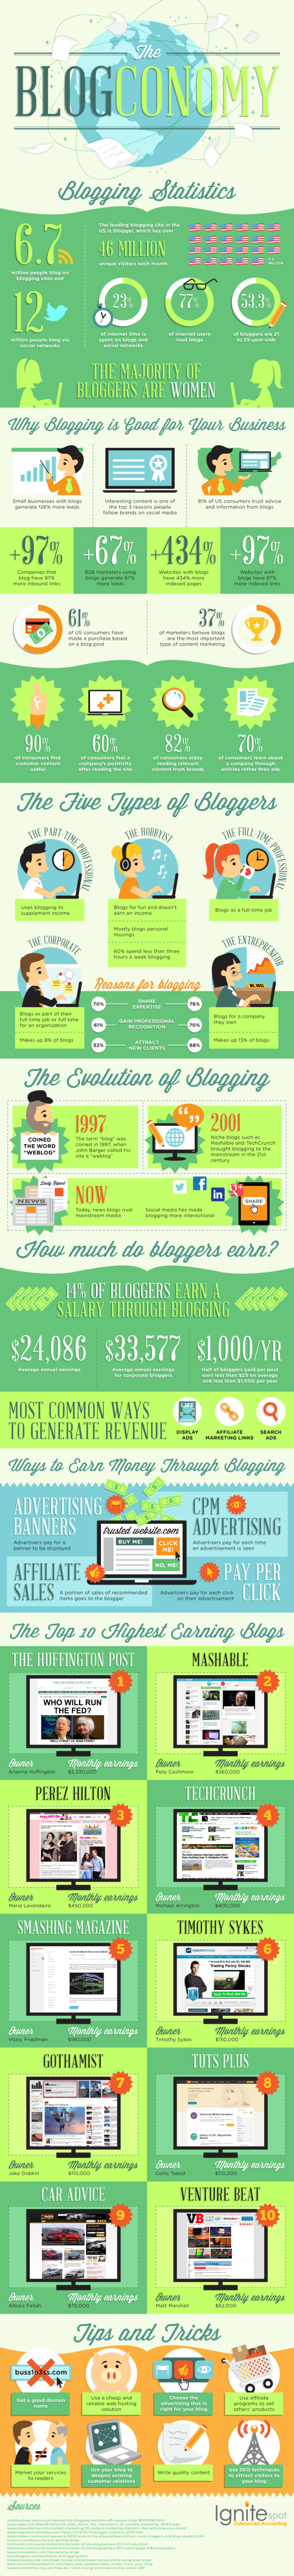 The Blogconomy - Infographics about Blog, Blogging & Bloggers